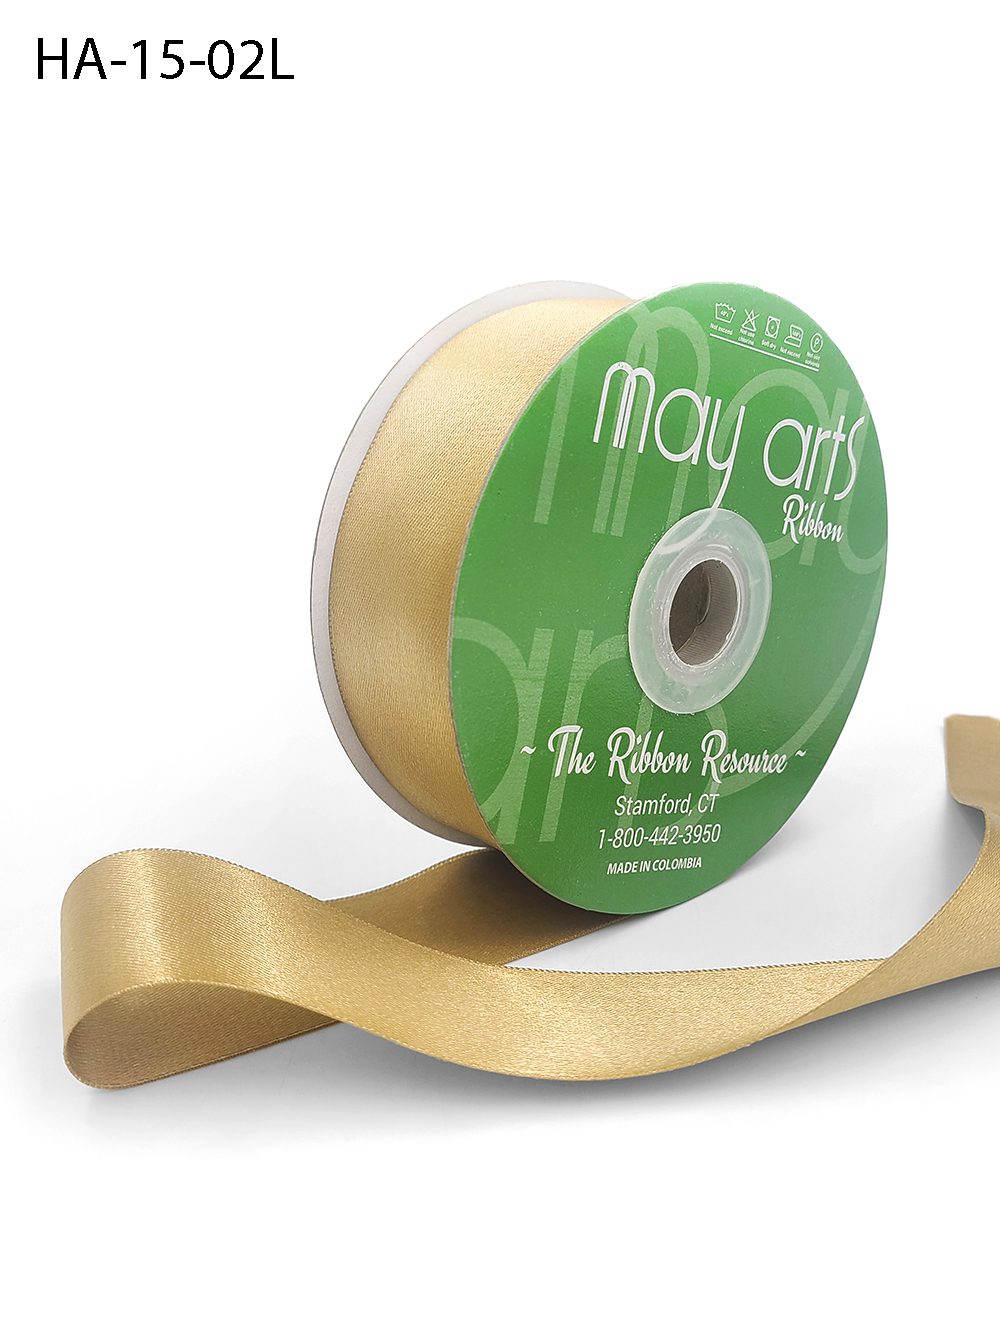 Waterproof Satin Ribbon 2 1/2 Wide Archives - Wholesale South